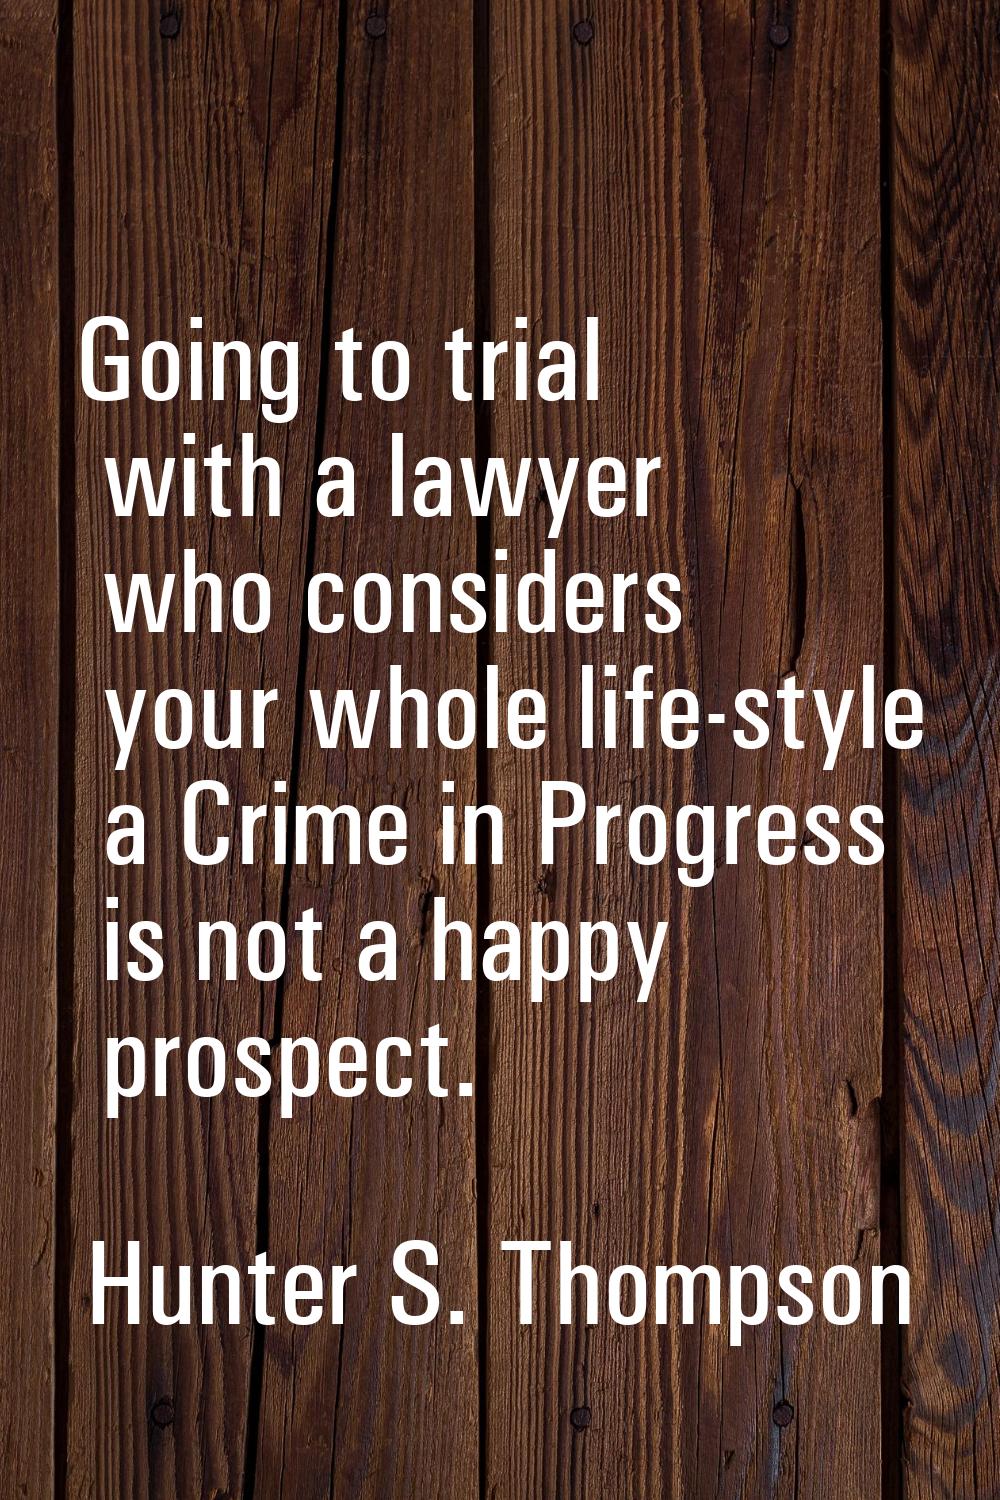 Going to trial with a lawyer who considers your whole life-style a Crime in Progress is not a happy